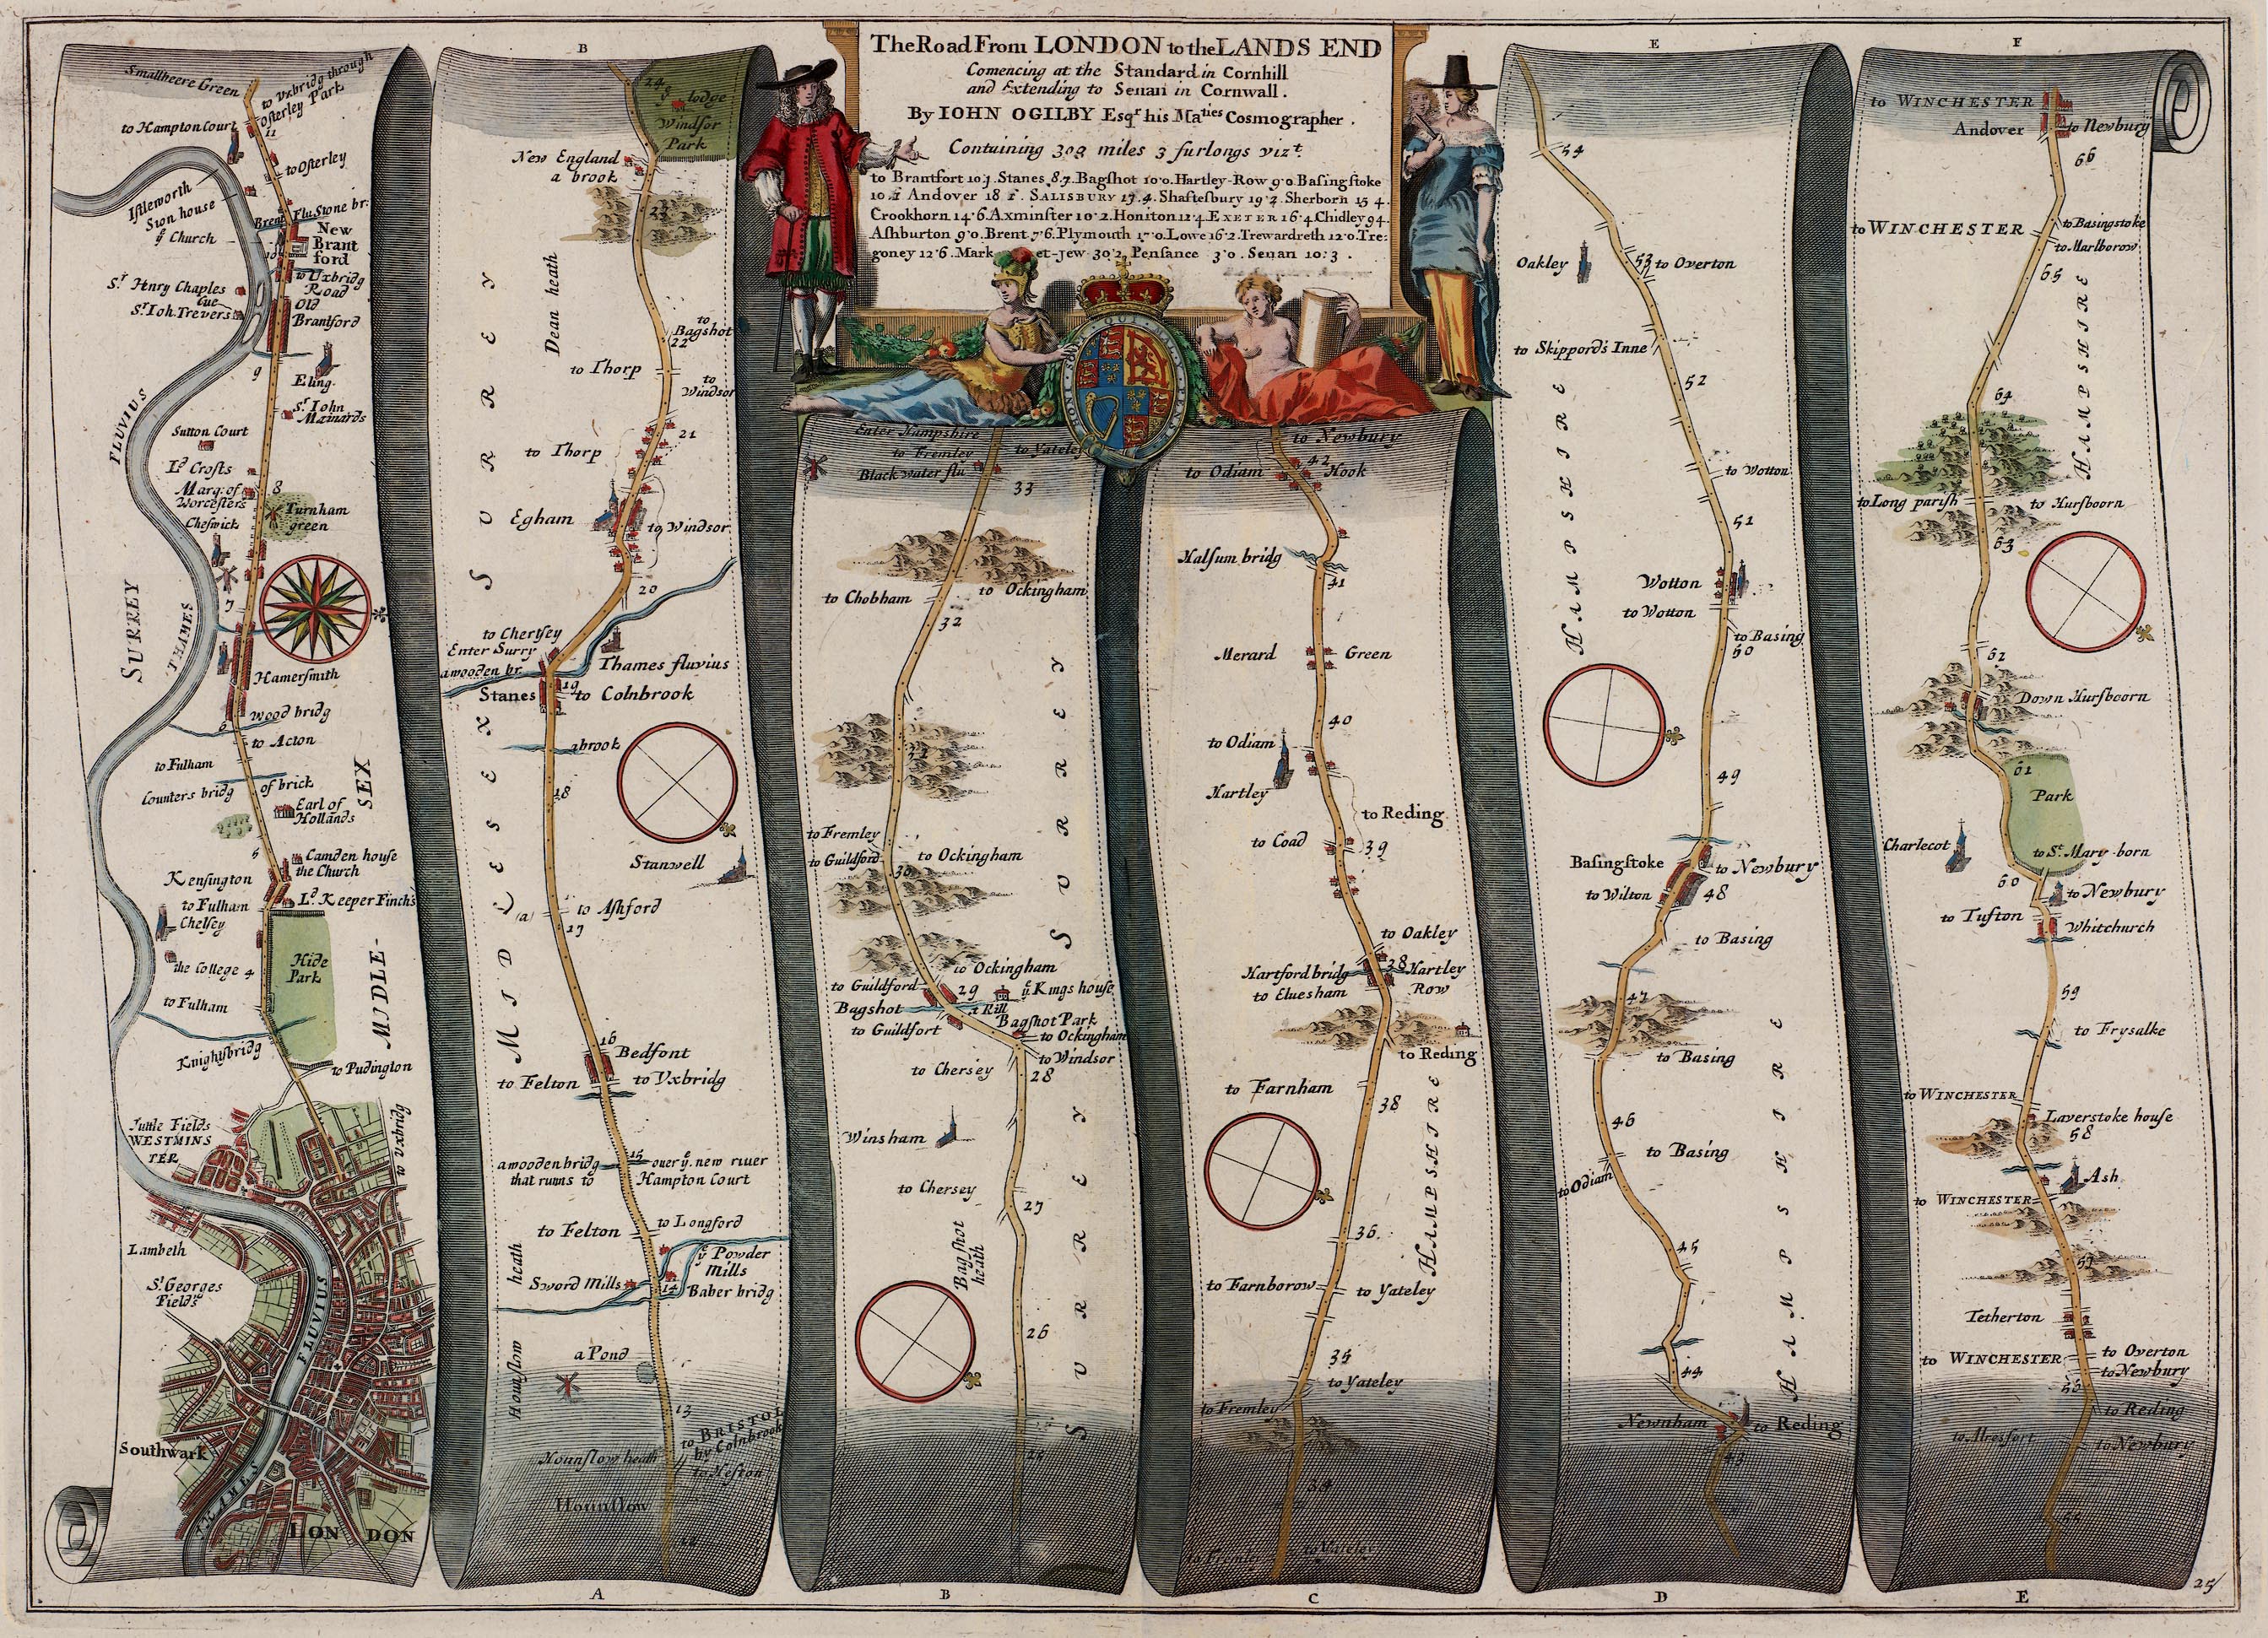 The Road From LONDON to the LANDS END (1675)